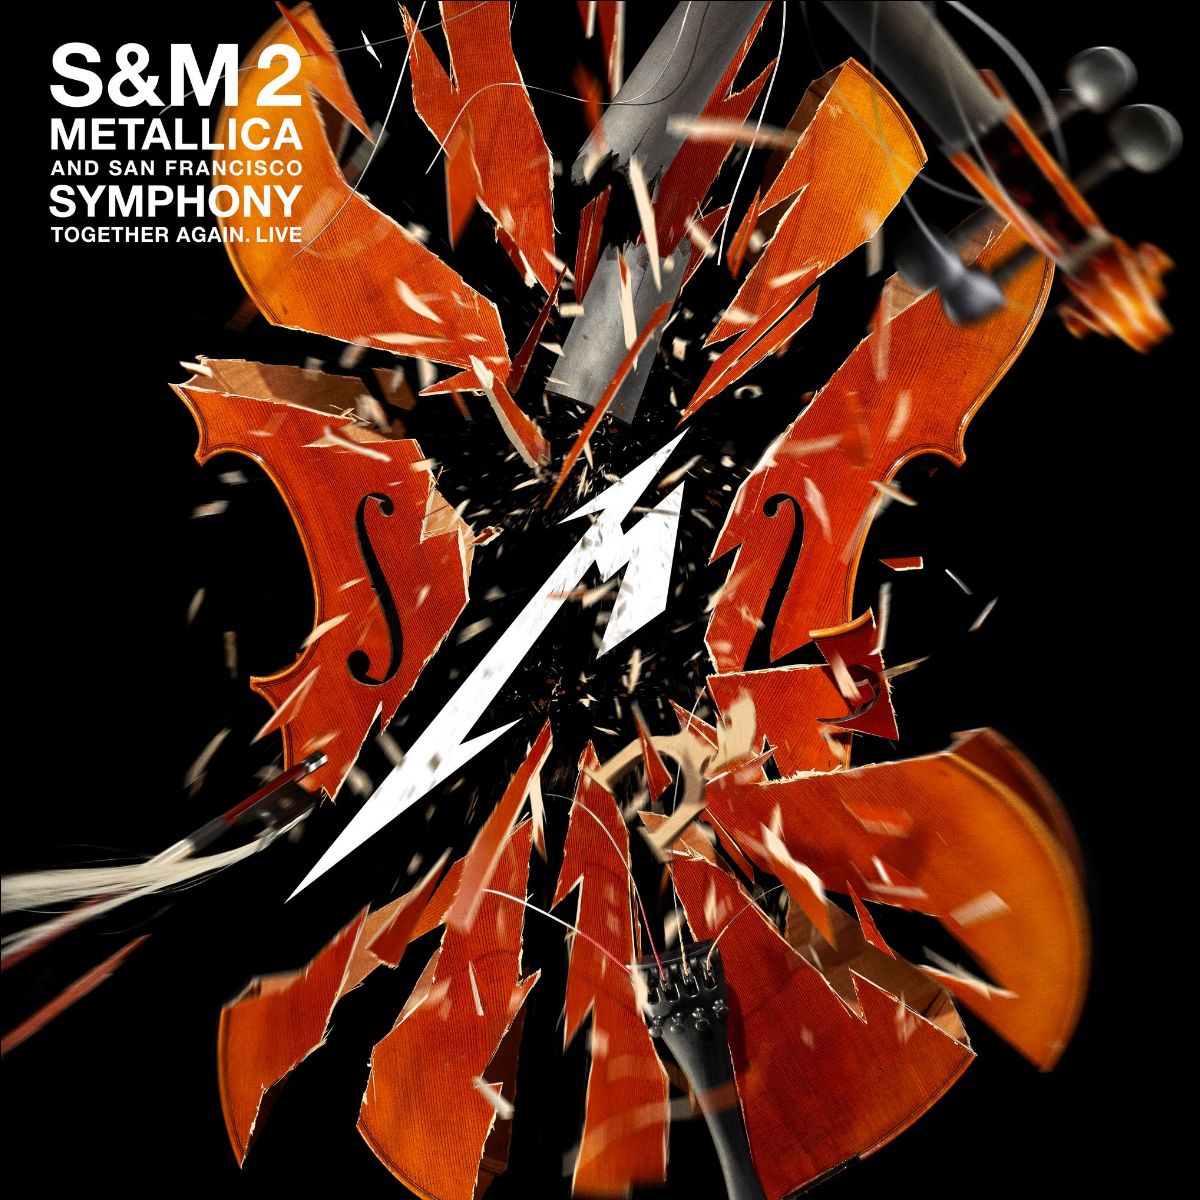 METALLICA & SAN FRANCISCO SYMPHONY: S&M2 THE LONG-AWAITED ALBUM AND FILM AVAILABLE NOW